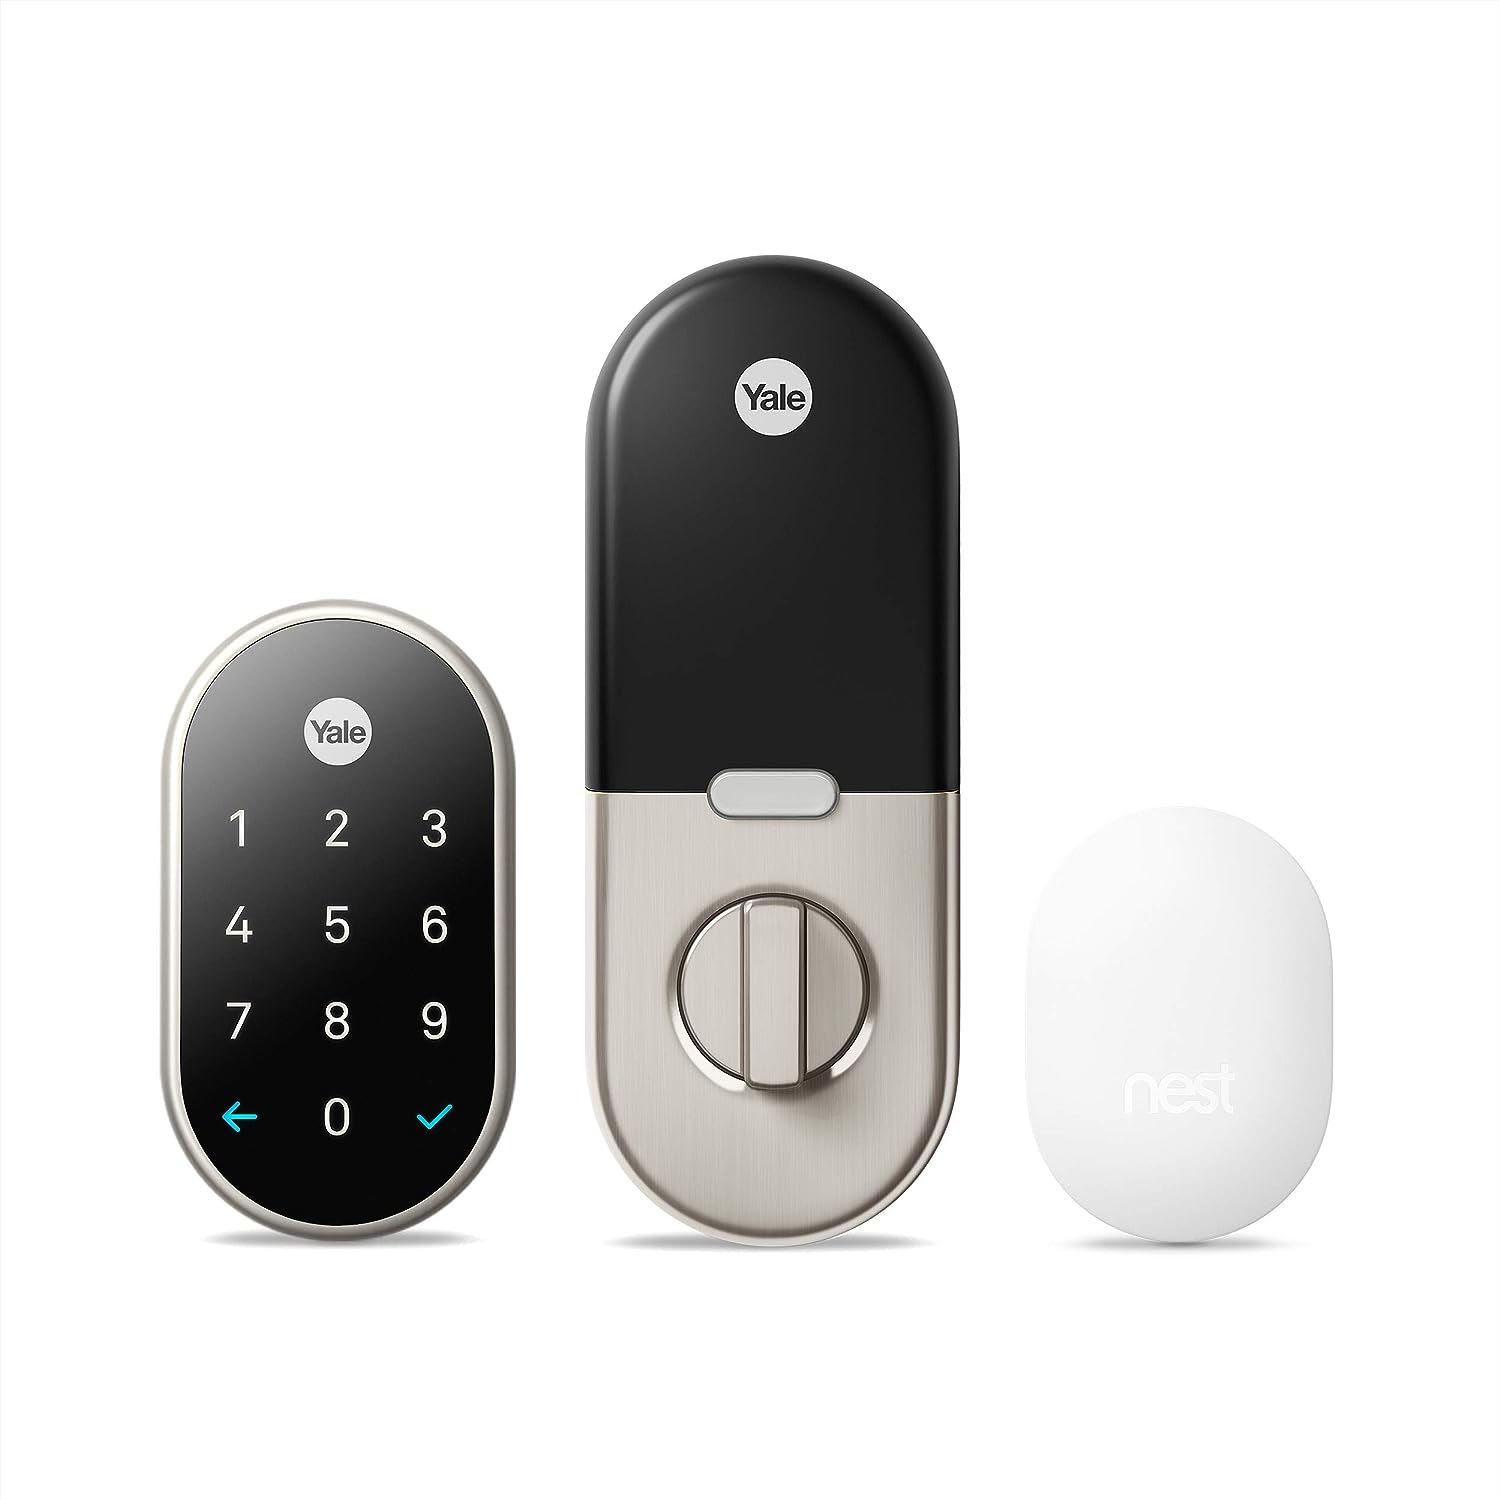 Google Nest x Yale Lock Review – The Ultimate Tamper-Proof Smart Lock for Keyless Entry